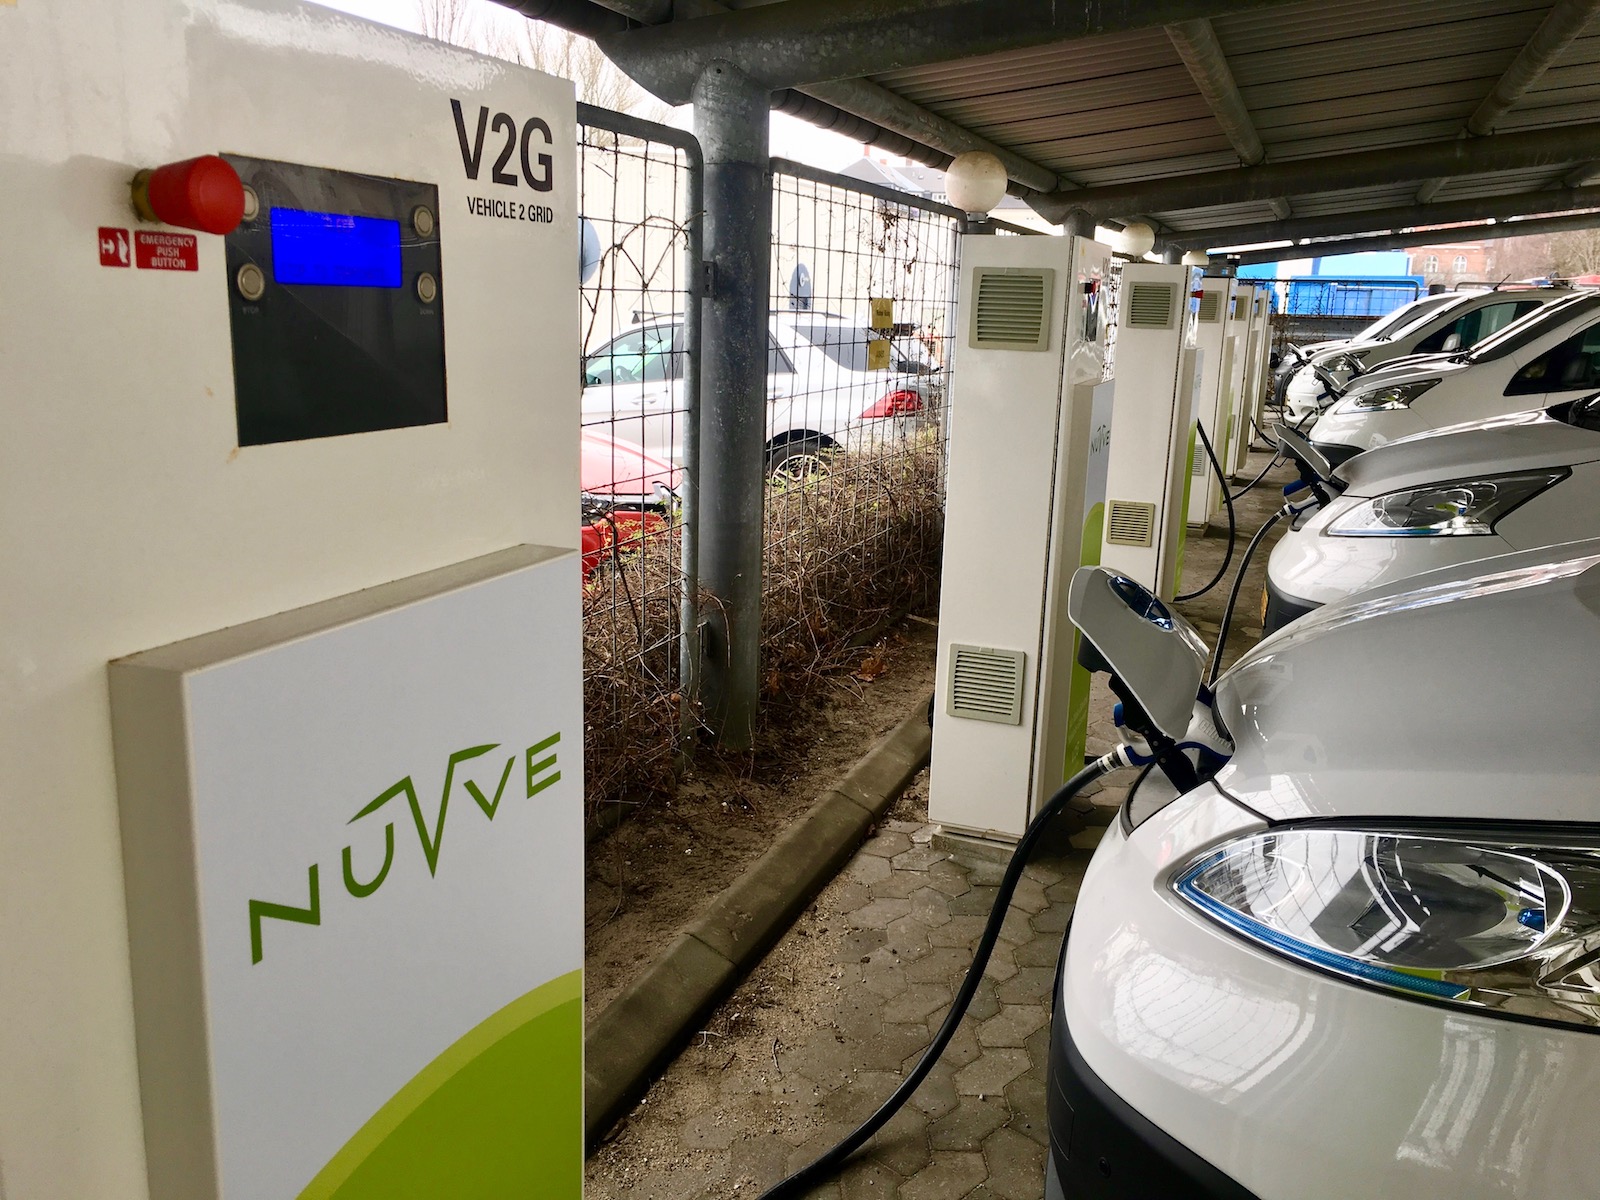 A row of shiny white cars are plugged into green and white wall chargers labeled "Nuvve V2G"